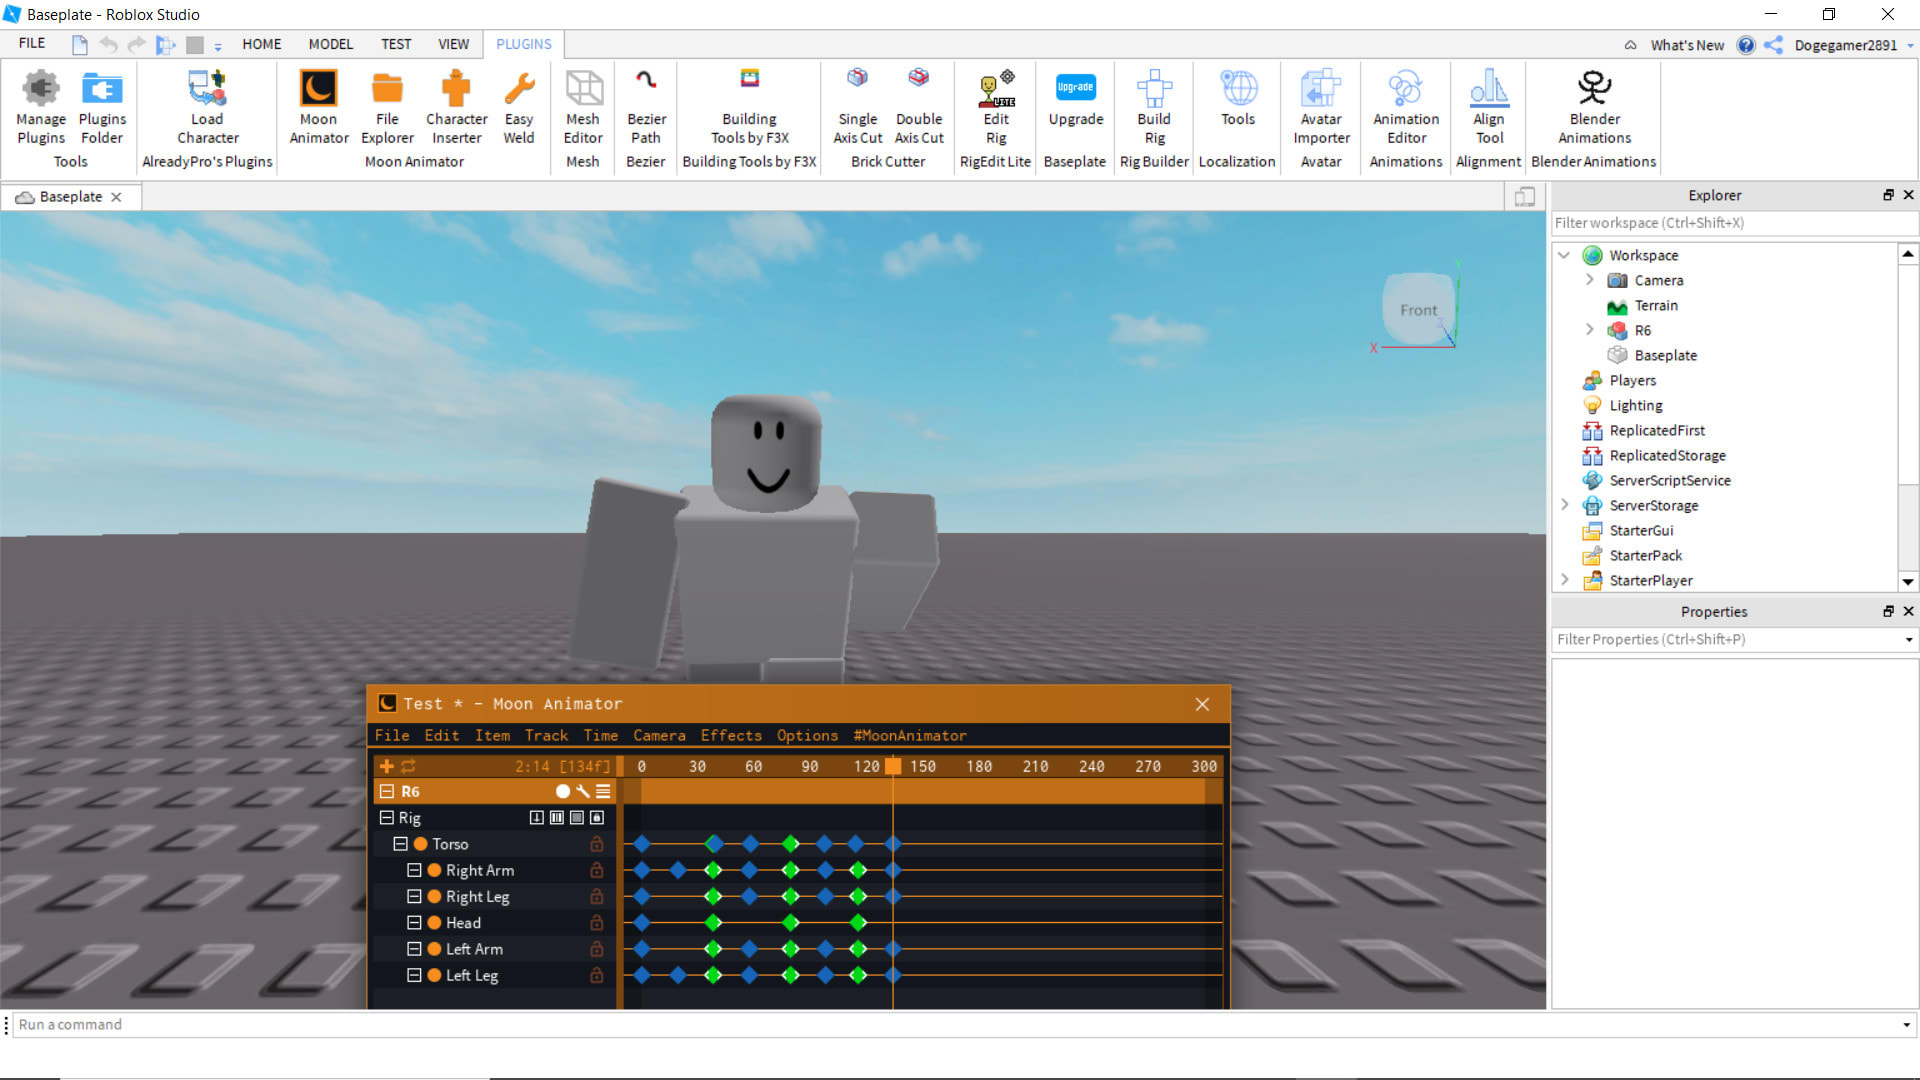 Animate A Roblox Character In Any Way You Want By Dogegamer2891 - roblox avatar editor site builder